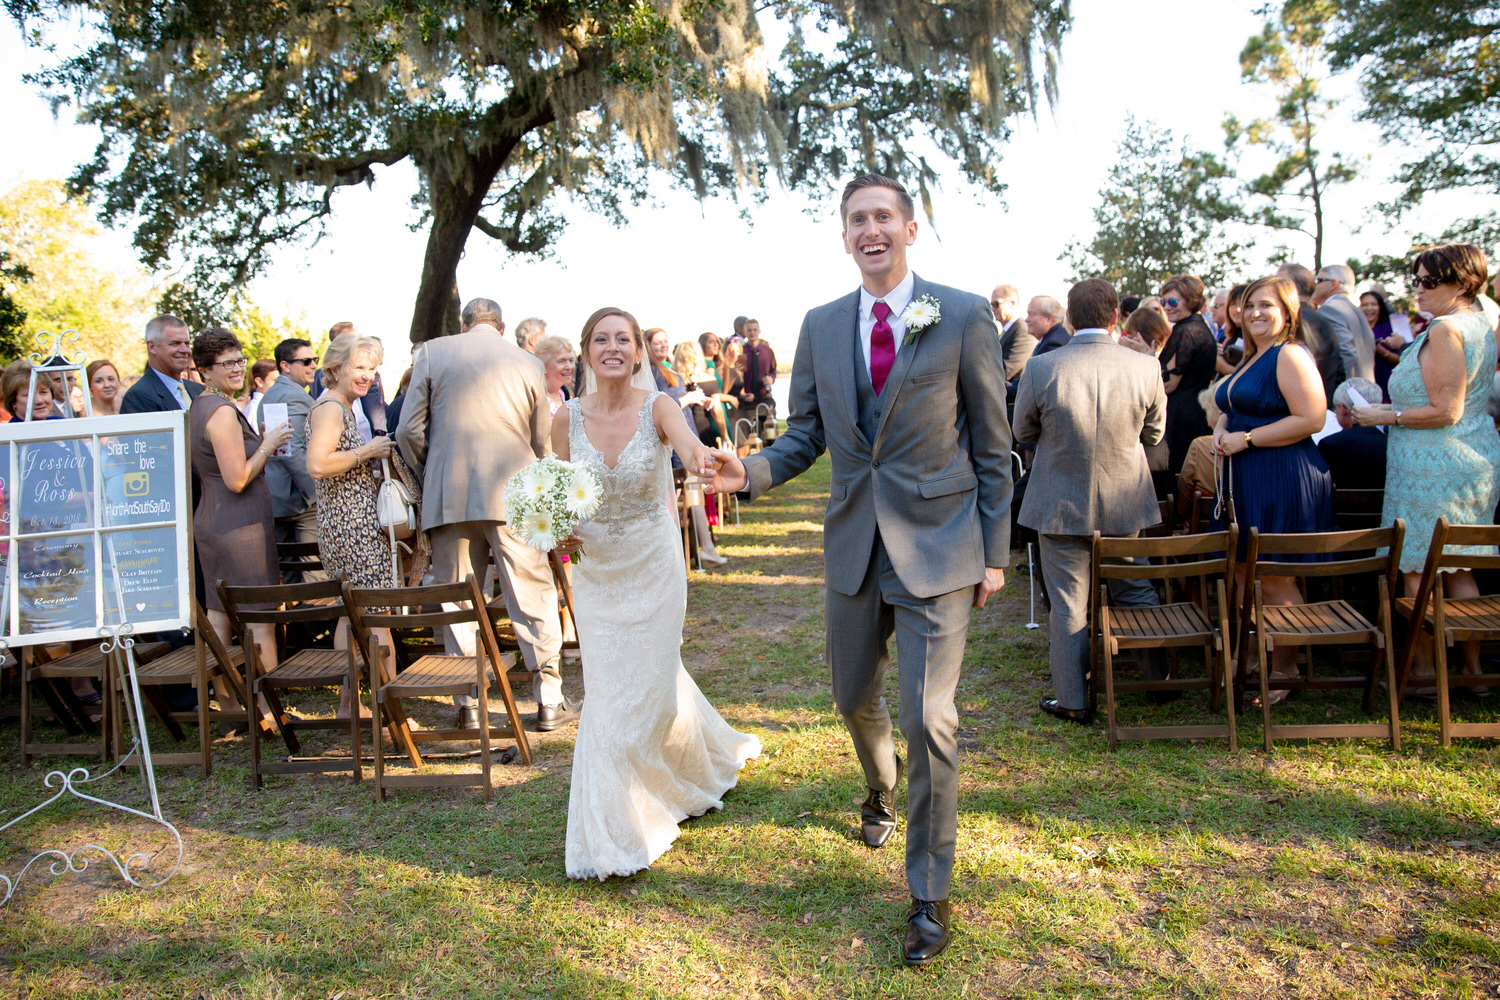 Bride & Groom excitedly walk down the aisle at their outdoor wedding ceremony at Sunnyside Plantation. 